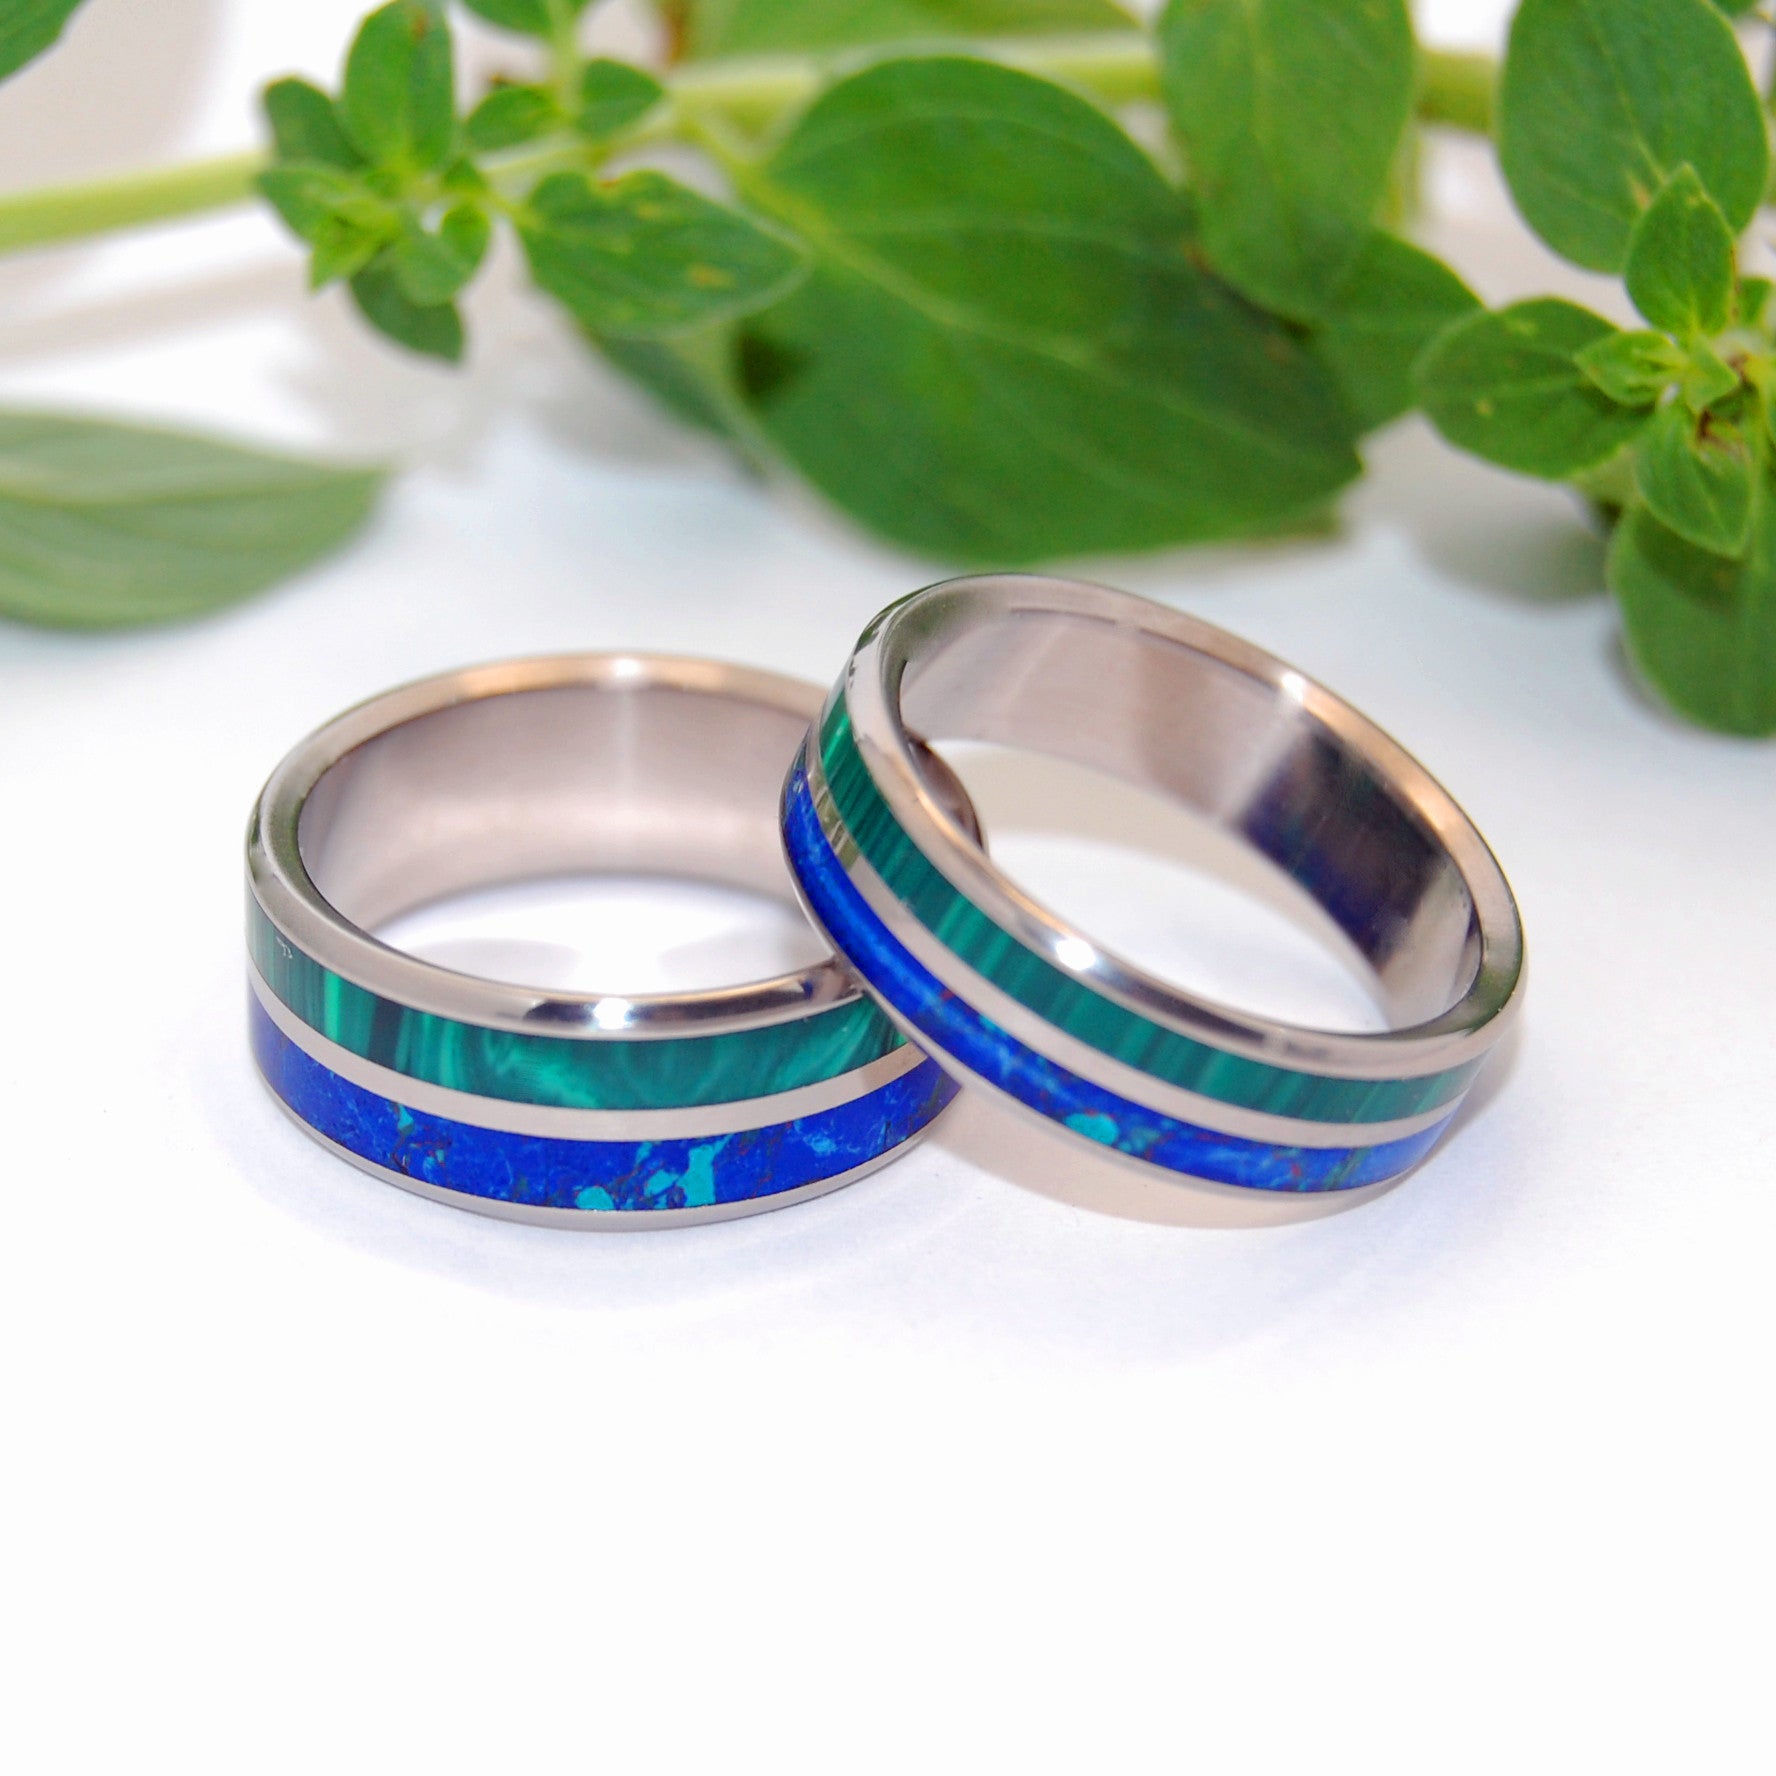 CAN'T HOLD US BACK | Malachite Stone, Azurite Stone & Titanium - Unique Wedding Rings - Wedding Rings Set - Minter and Richter Designs